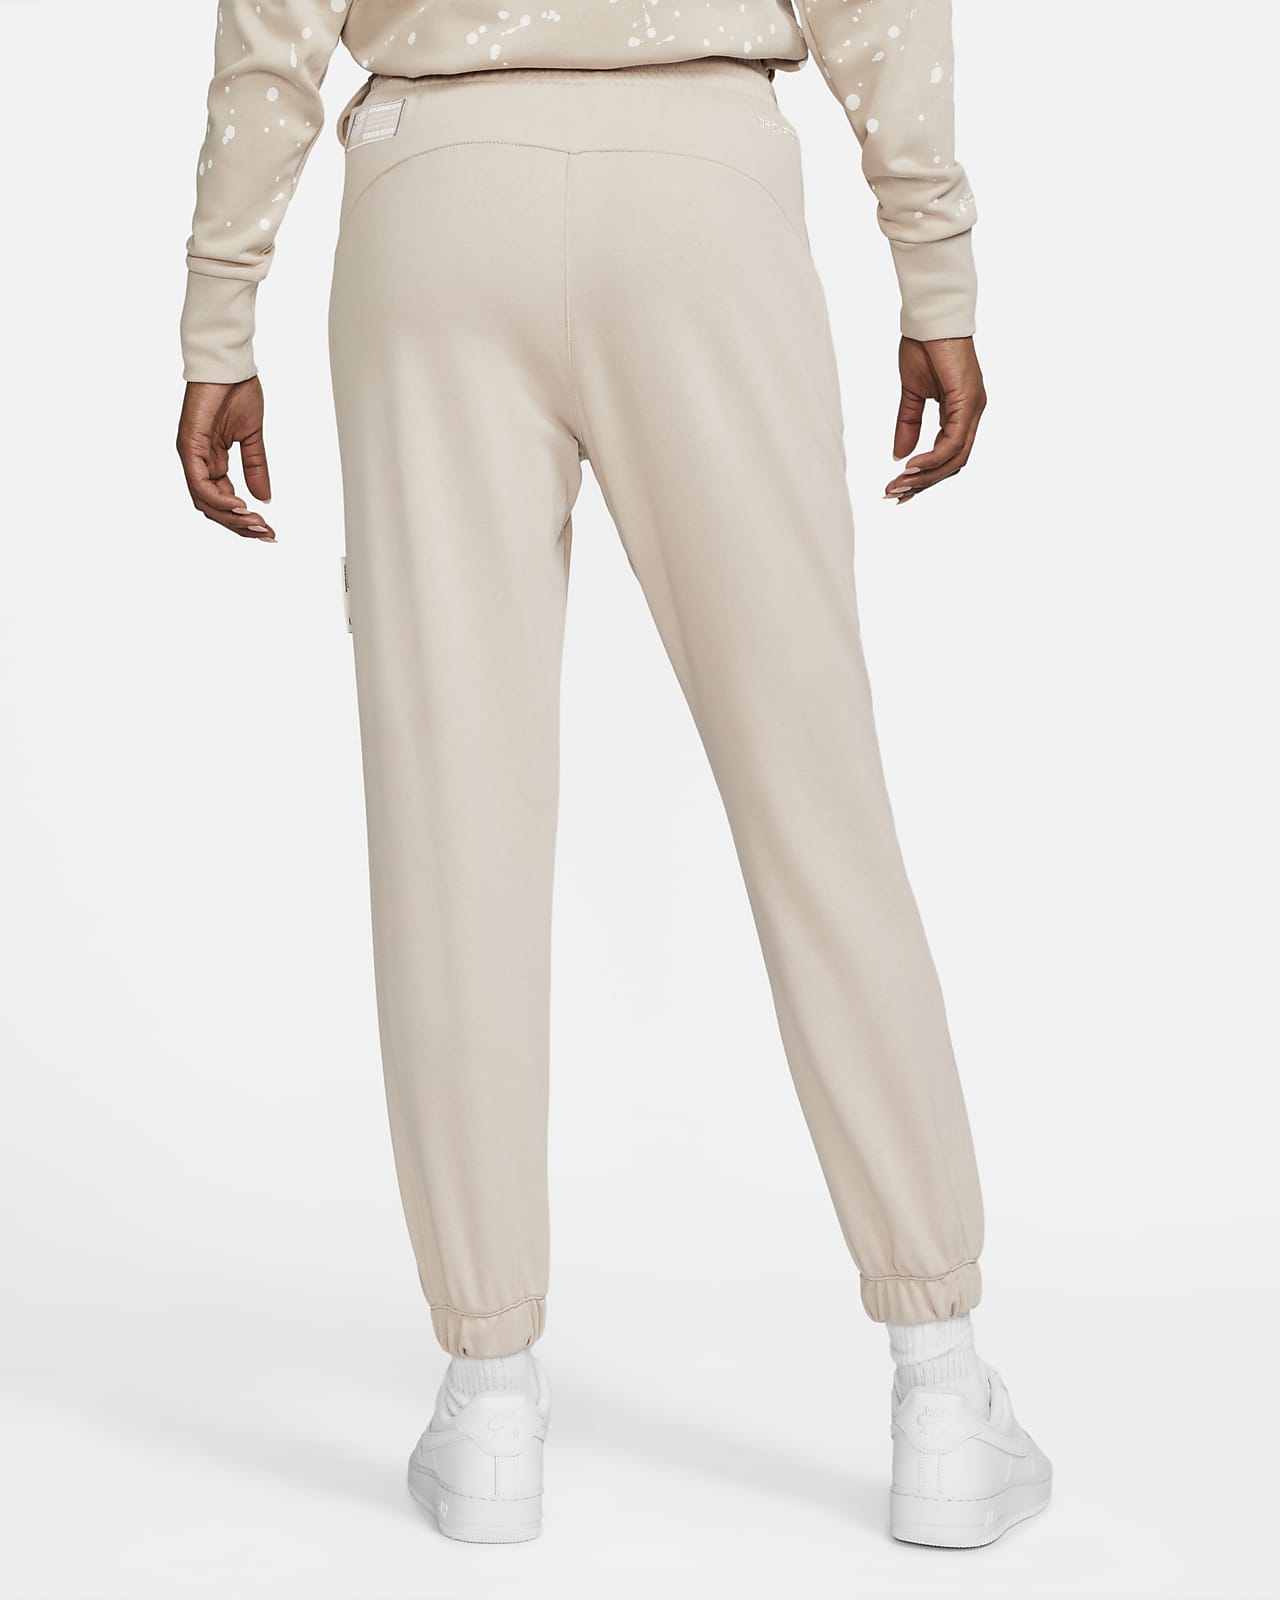 Women's Straight Fit pants - Off-White